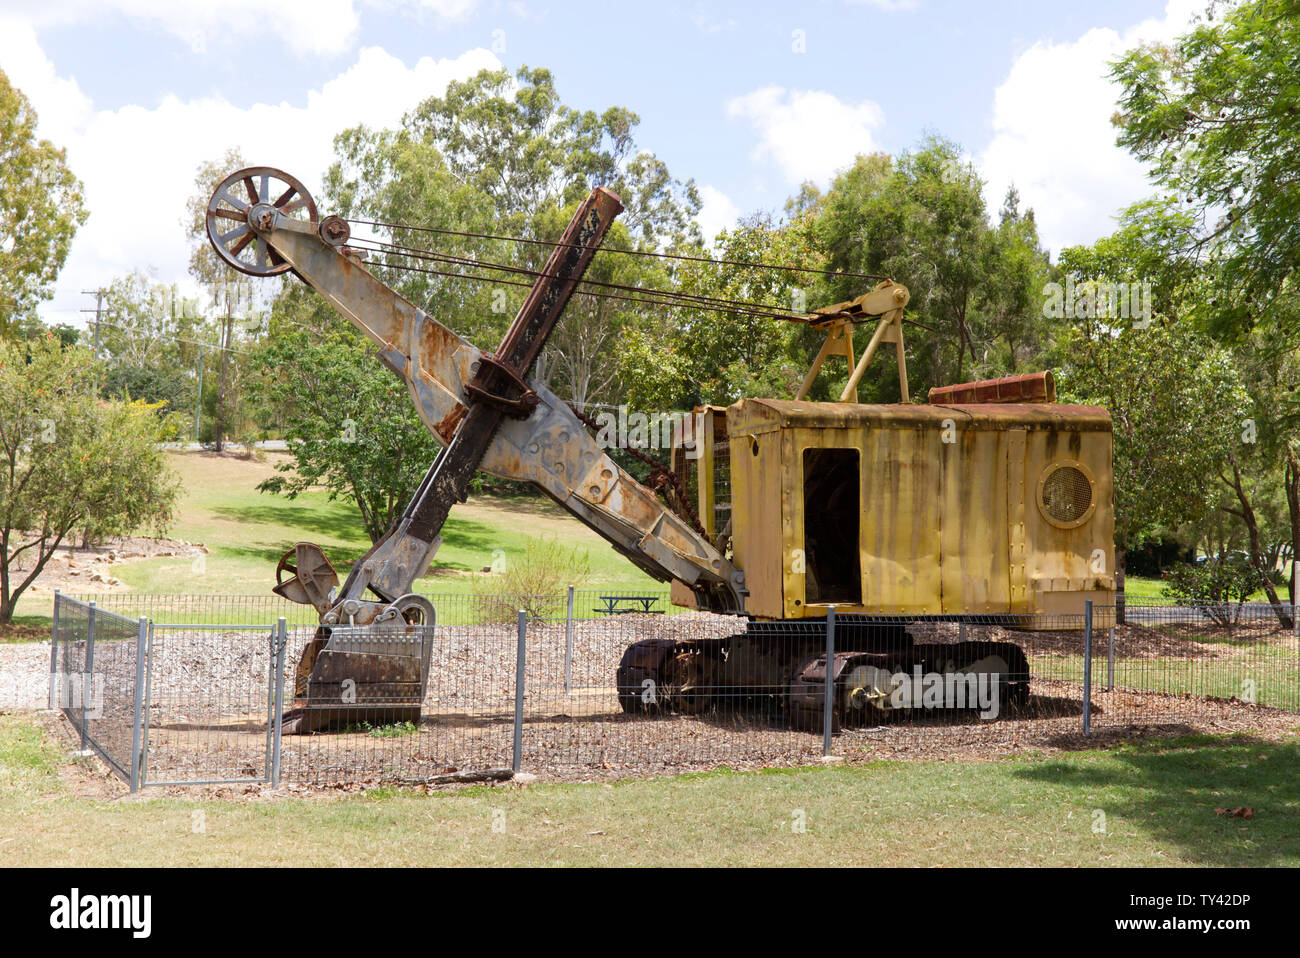 Mining display at the former gold mining town of Mount Morgan Queensland Australia Stock Photo